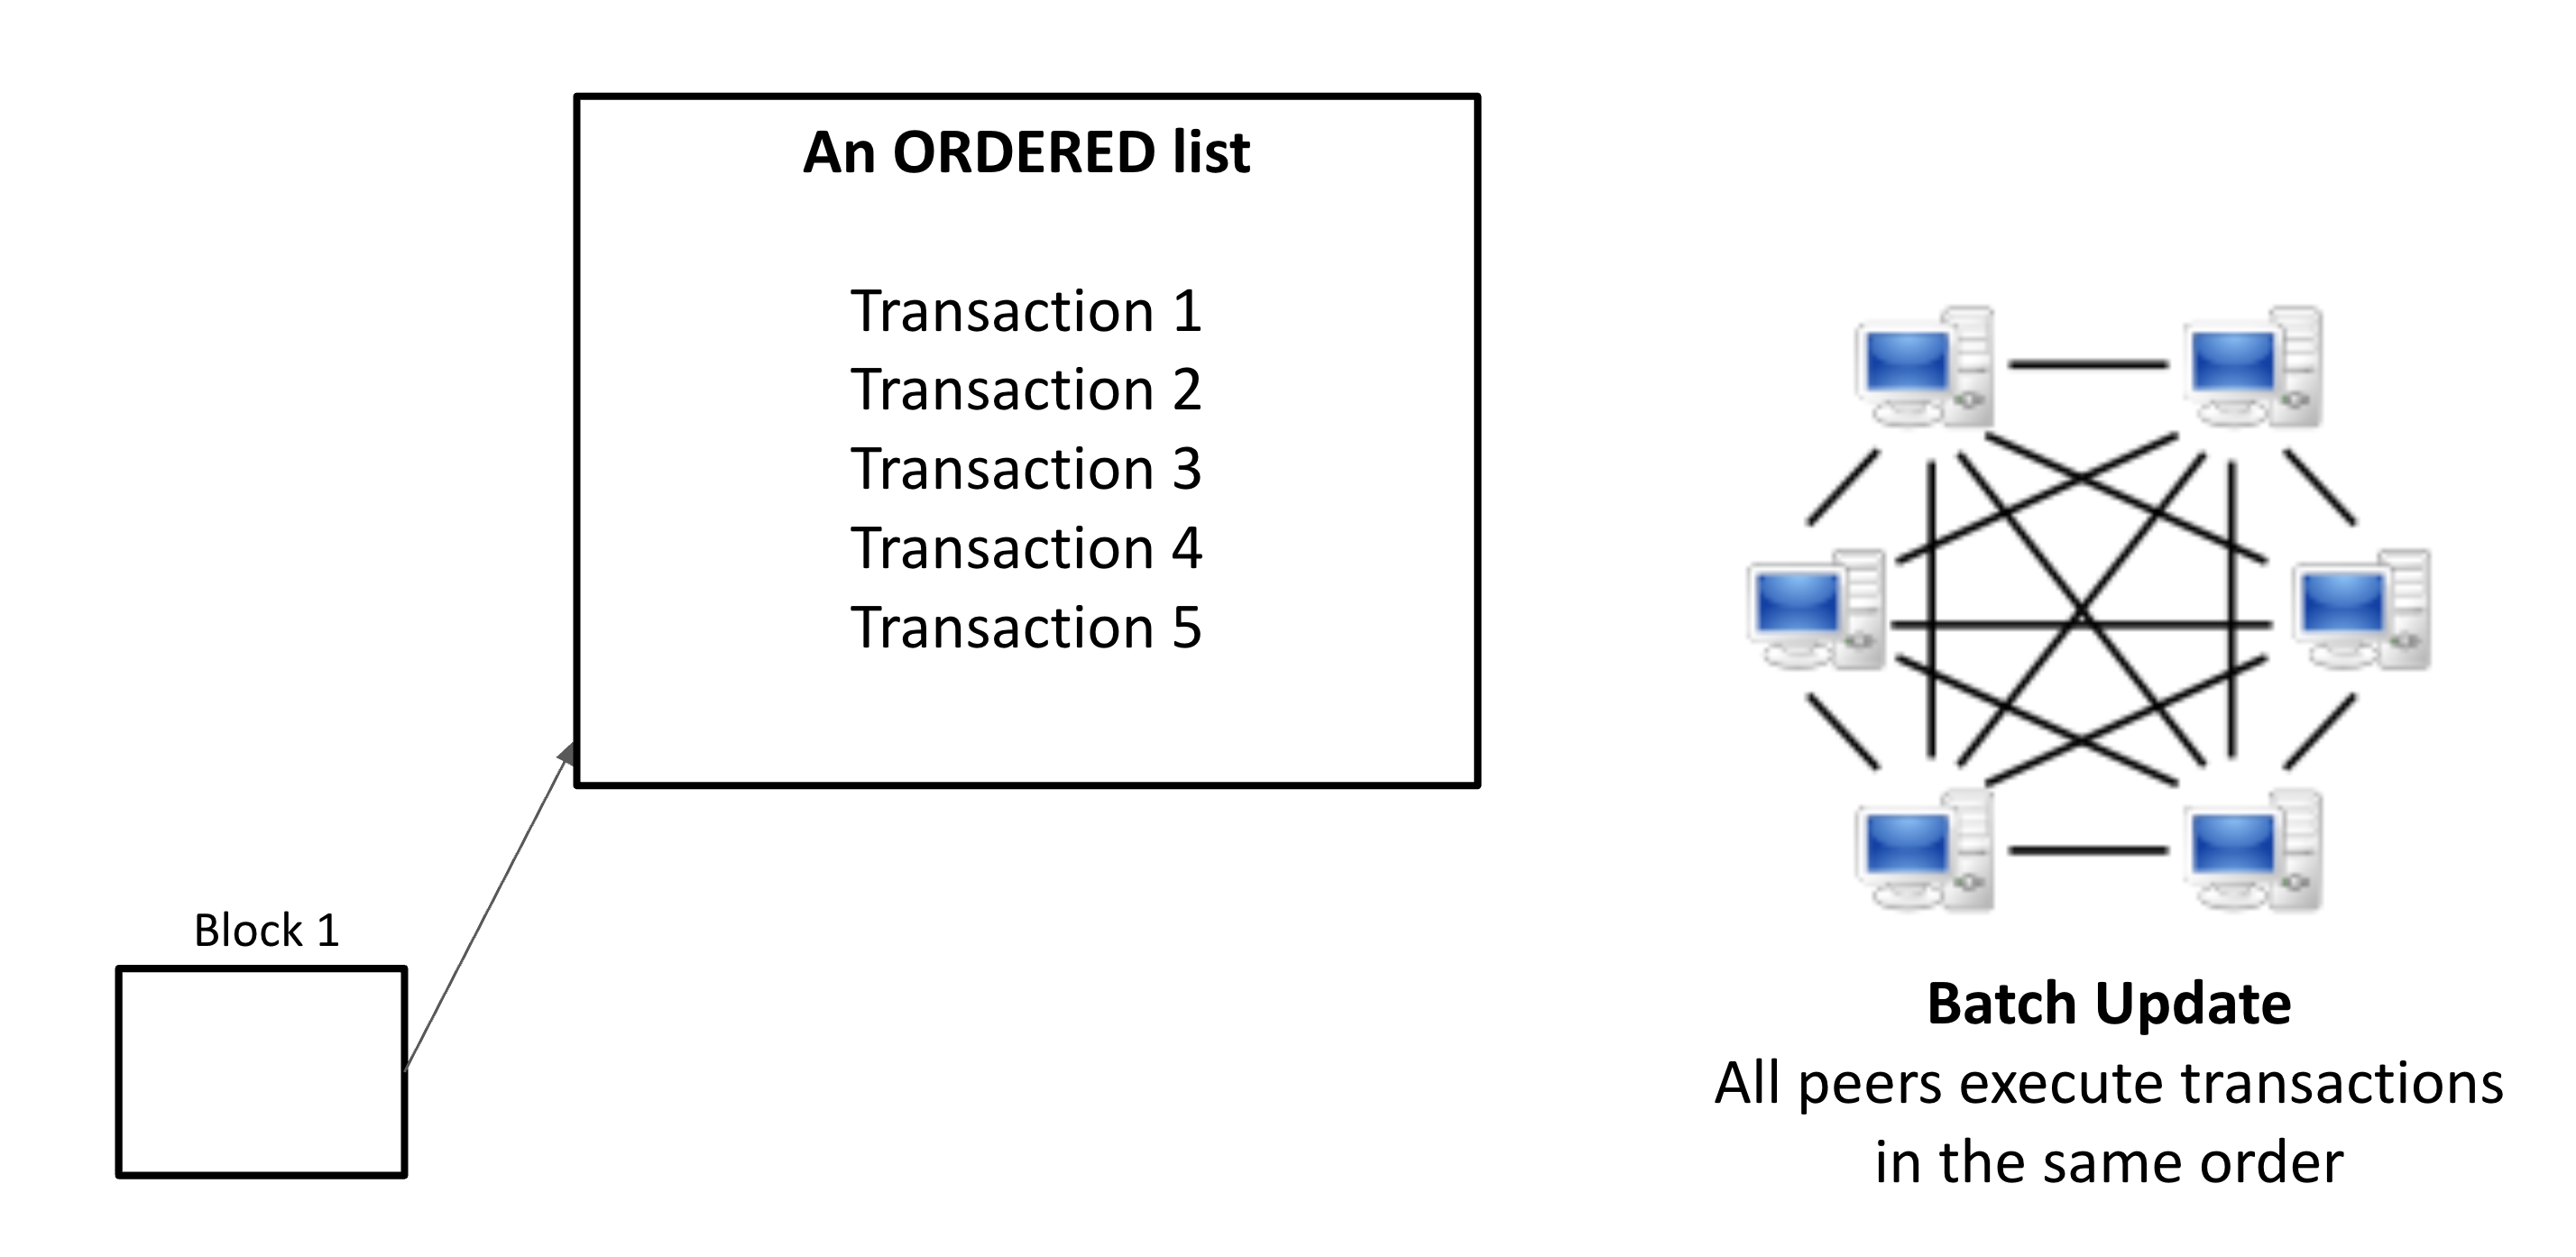 Figure 2: A block is an ordered list of transactions and it acts as a batch update for the database. 